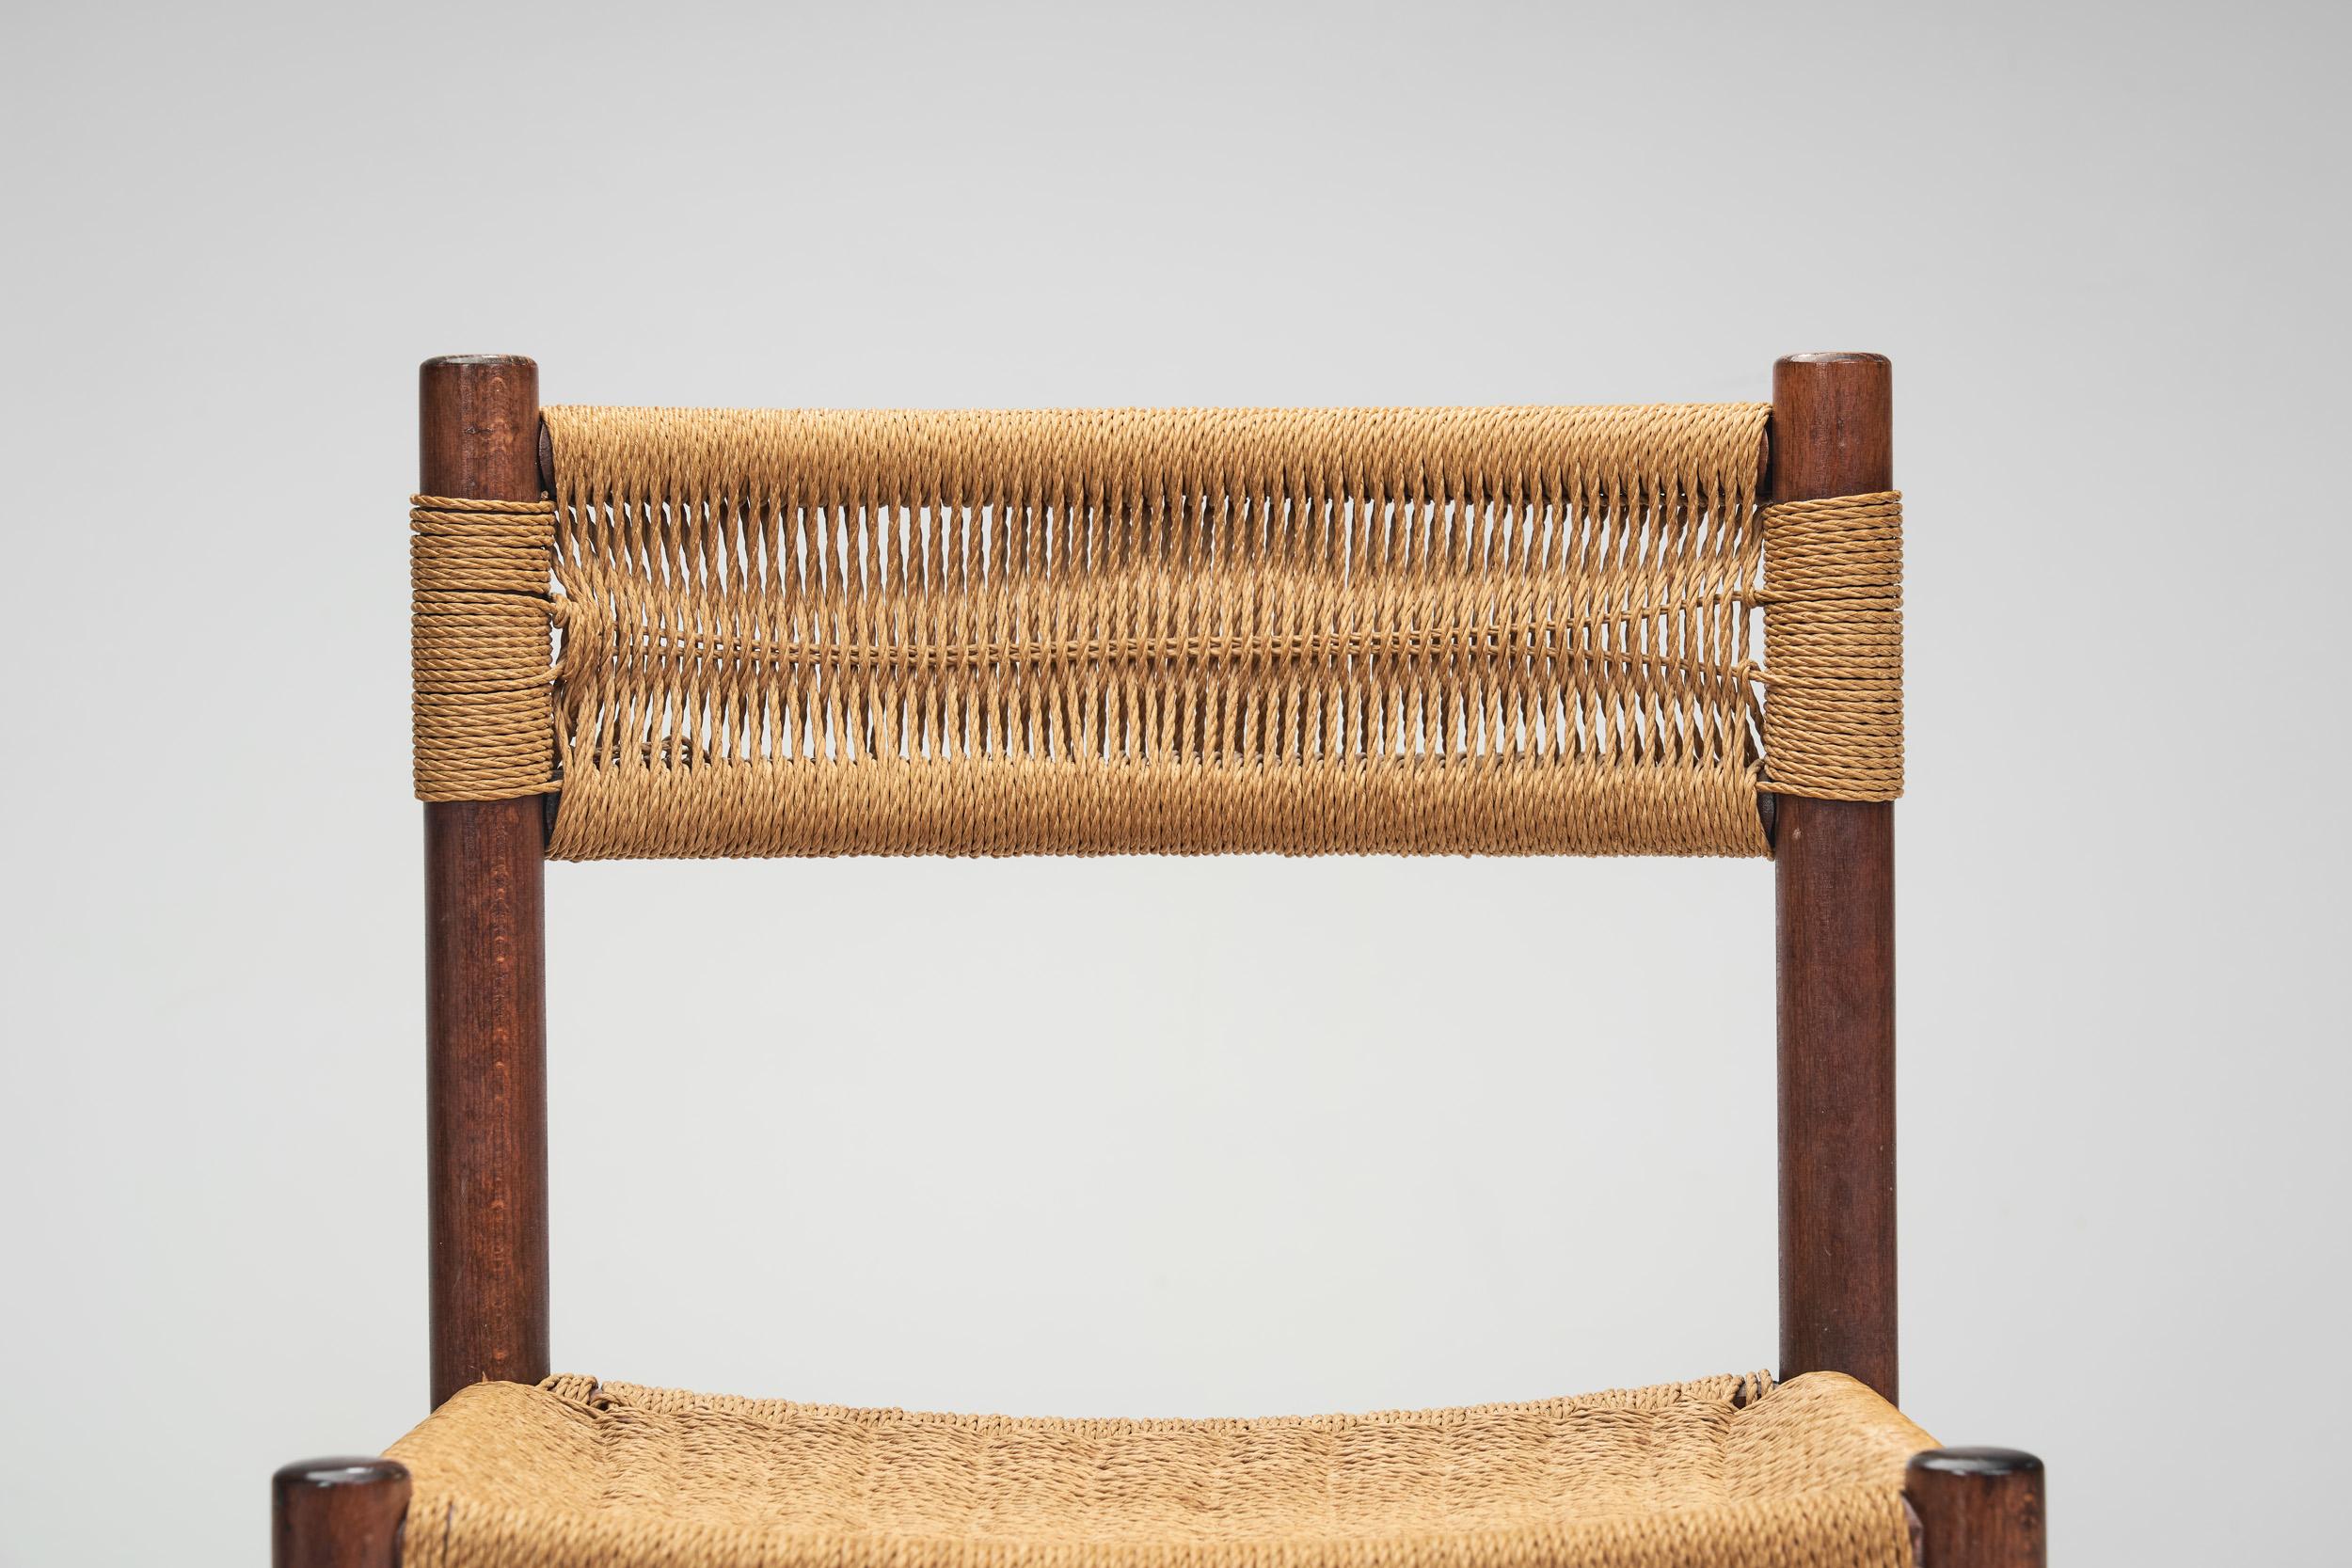 “Dordogne” style Chairs with Woven Papercord Seats and Backs, Europe ca 1960s 1